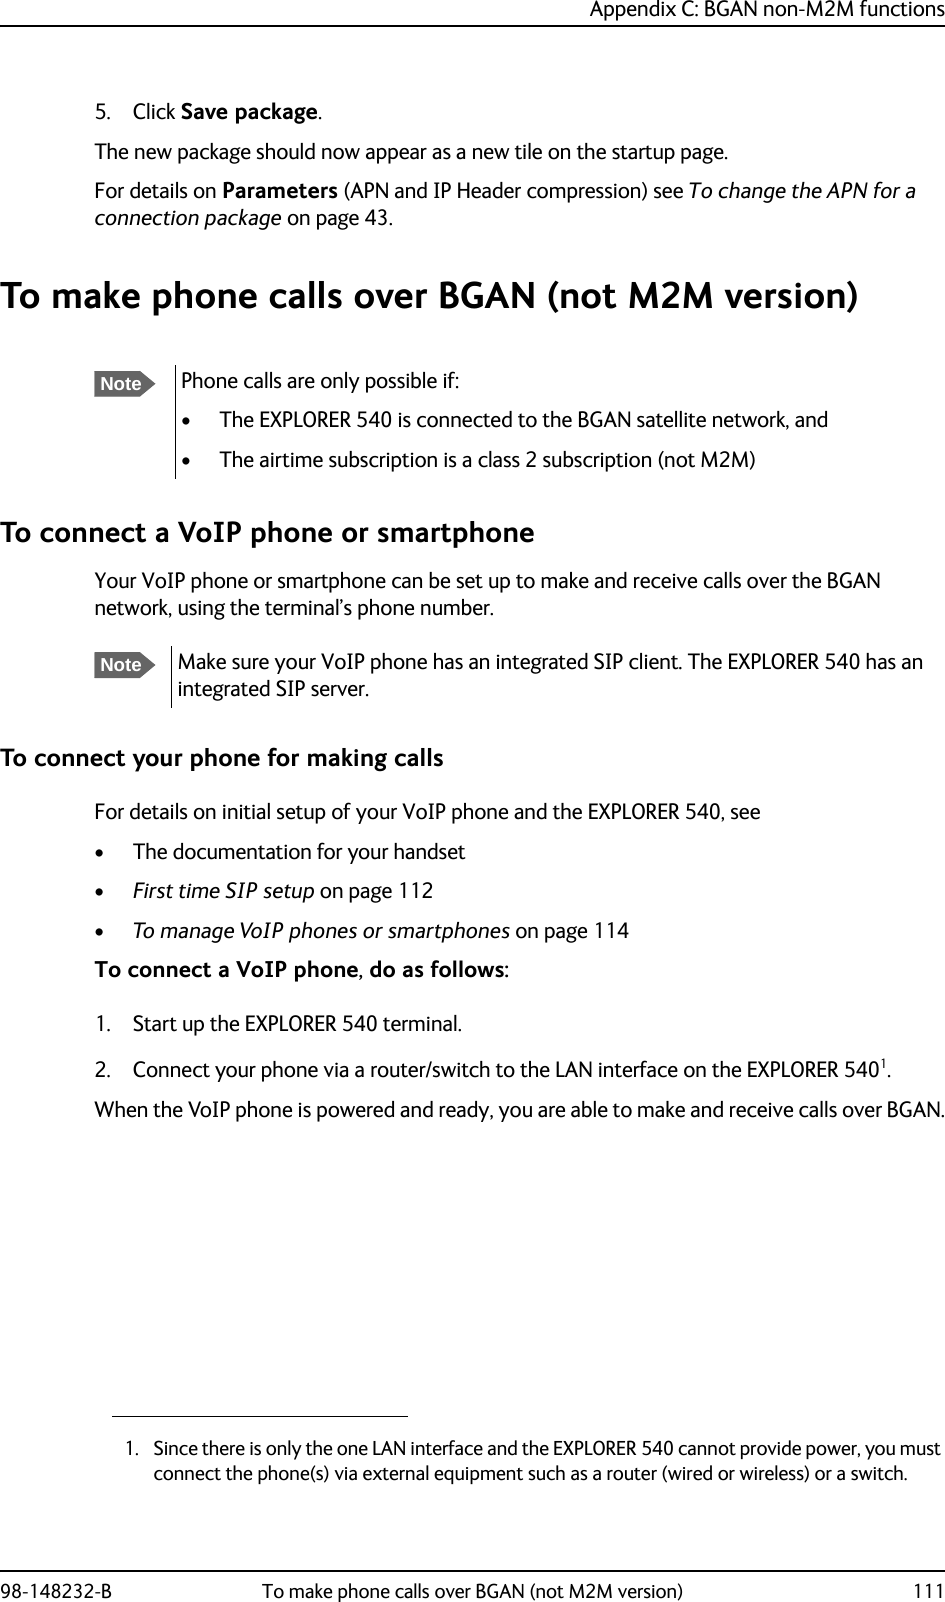 Appendix C: BGAN non-M2M functions98-148232-B To make phone calls over BGAN (not M2M version) 1115. Click Save package.The new package should now appear as a new tile on the startup page.For details on Parameters (APN and IP Header compression) see To change the APN for a connection package on page 43.To make phone calls over BGAN (not M2M version)To connect a VoIP phone or smartphoneYour VoIP phone or smartphone can be set up to make and receive calls over the BGAN network, using the terminal’s phone number.To connect your phone for making callsFor details on initial setup of your VoIP phone and the EXPLORER 540, see• The documentation for your handset•First time SIP setup on page 112•To manage VoIP phones or smartphones on page 114To connect a VoIP phone, do as follows:1. Start up the EXPLORER 540 terminal.2. Connect your phone via a router/switch to the LAN interface on the EXPLORER 5401. When the VoIP phone is powered and ready, you are able to make and receive calls over BGAN.NotePhone calls are only possible if:• The EXPLORER 540 is connected to the BGAN satellite network, and• The airtime subscription is a class 2 subscription (not M2M)NoteMake sure your VoIP phone has an integrated SIP client. The EXPLORER 540 has an integrated SIP server.1. Since there is only the one LAN interface and the EXPLORER 540 cannot provide power, you must connect the phone(s) via external equipment such as a router (wired or wireless) or a switch.